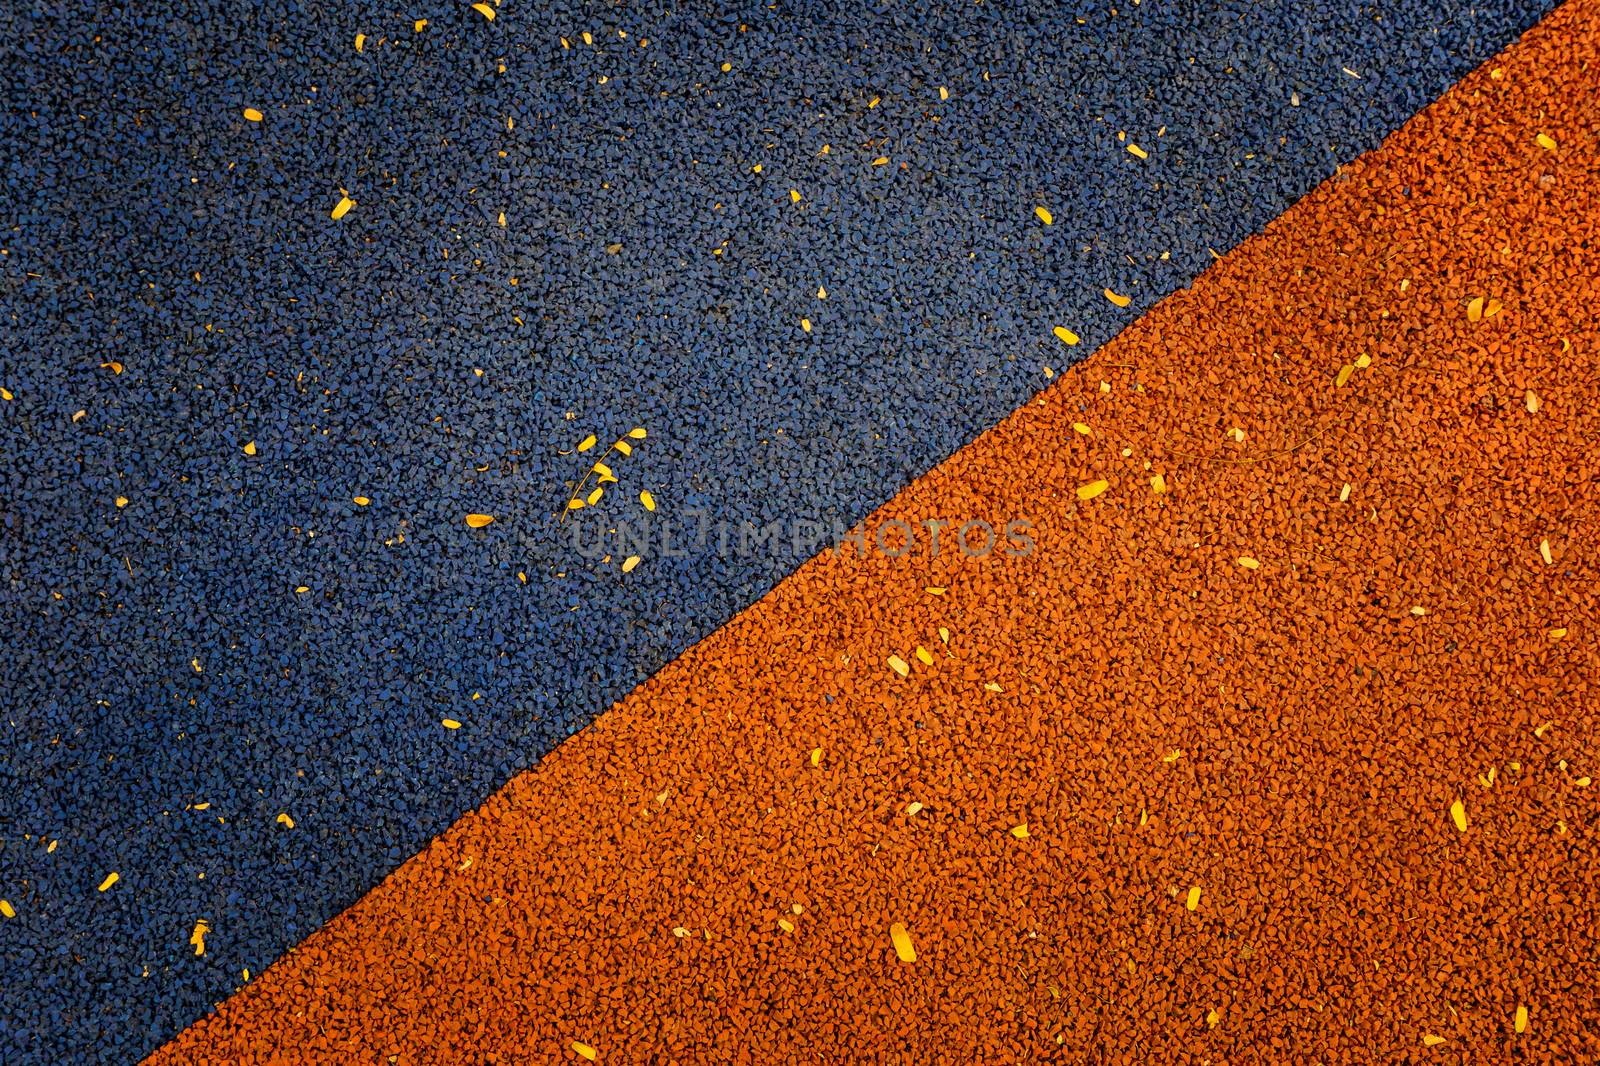 Blue and orange color of Rubber flooring Play park flooring background.